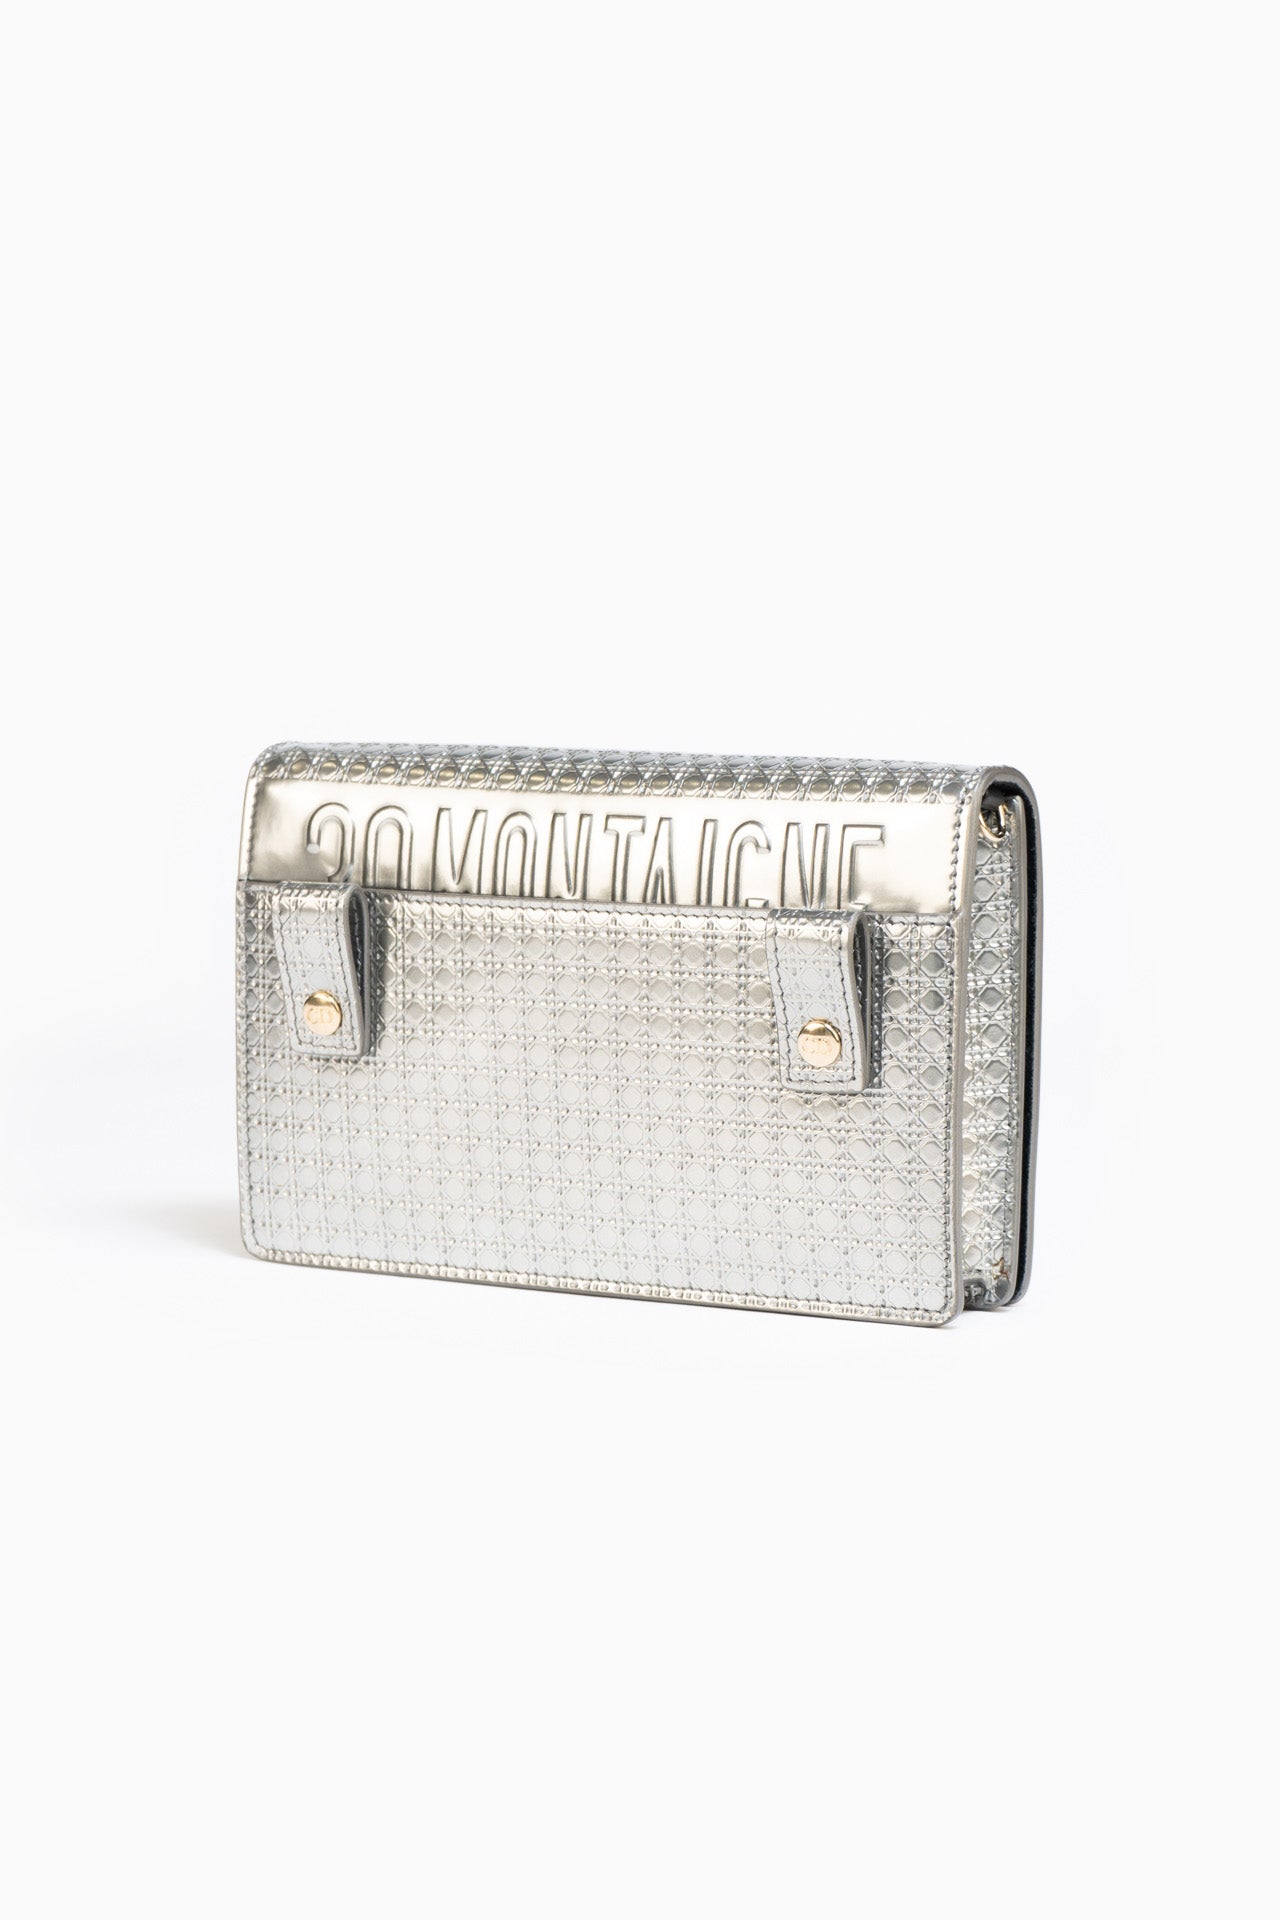 Dior 30 Montaigne 2-in-1 Leather Clutch Bag In Silver